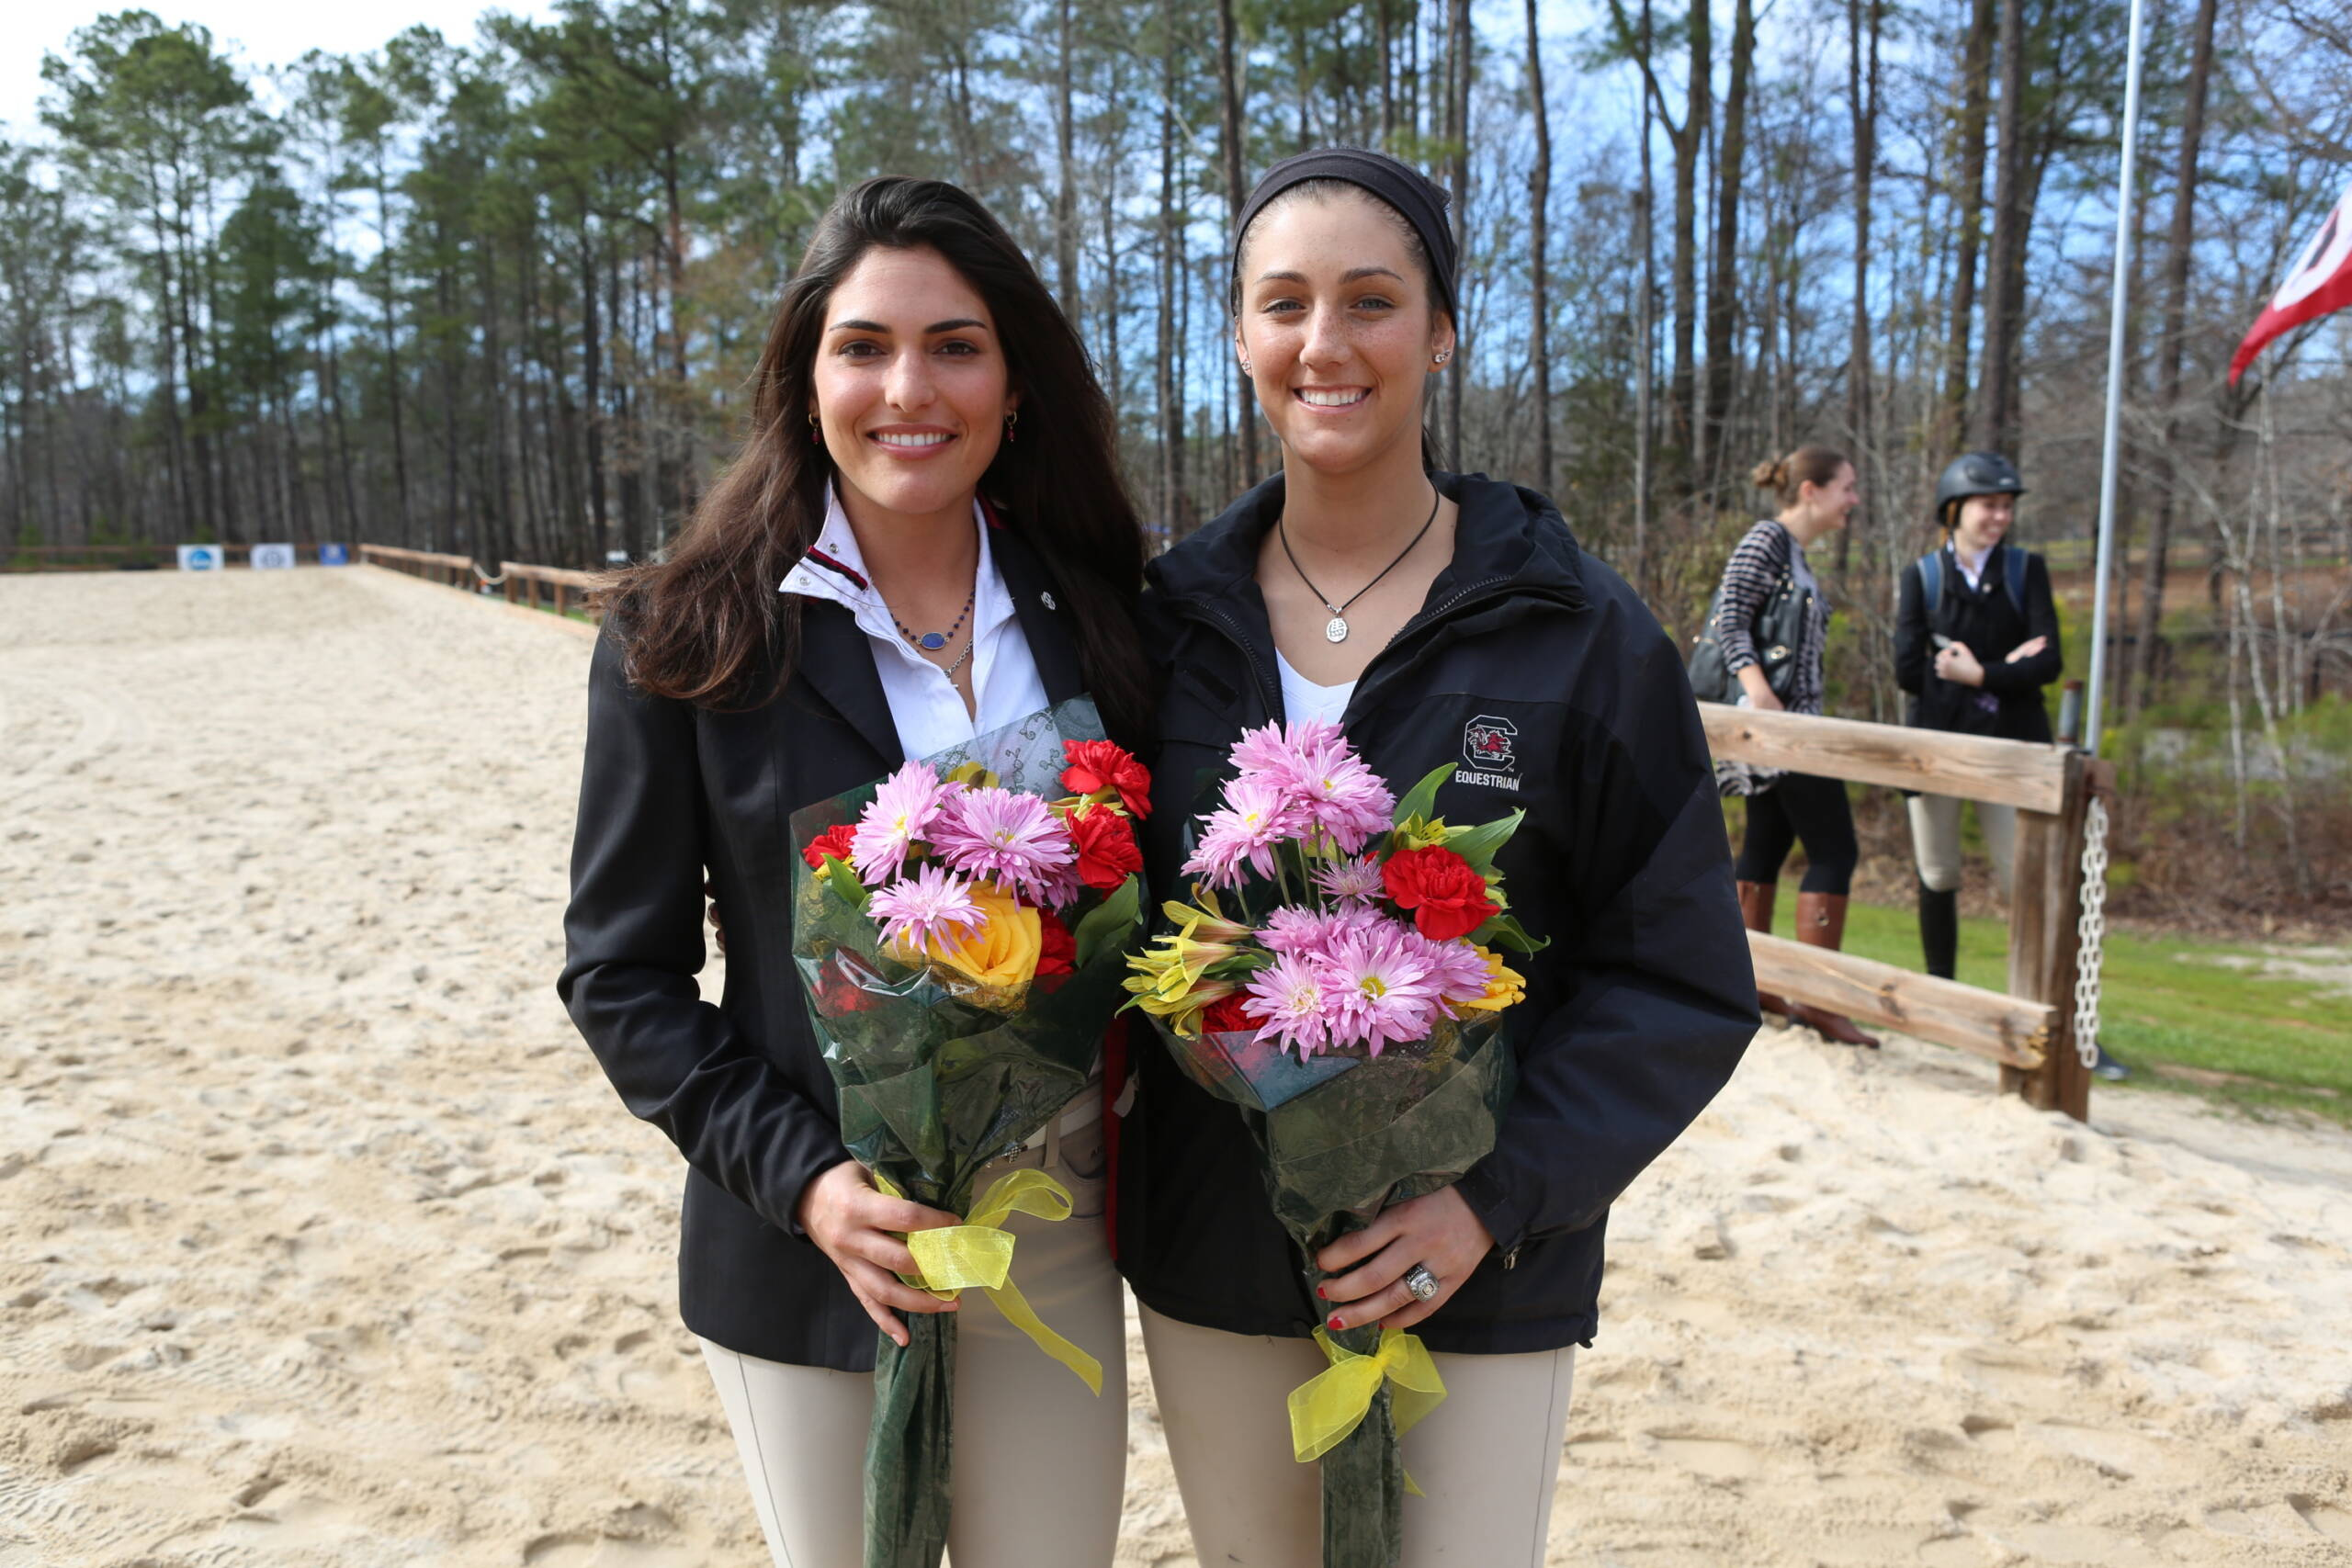 Alexa Anthony Named NCEA Rider of the Month for February